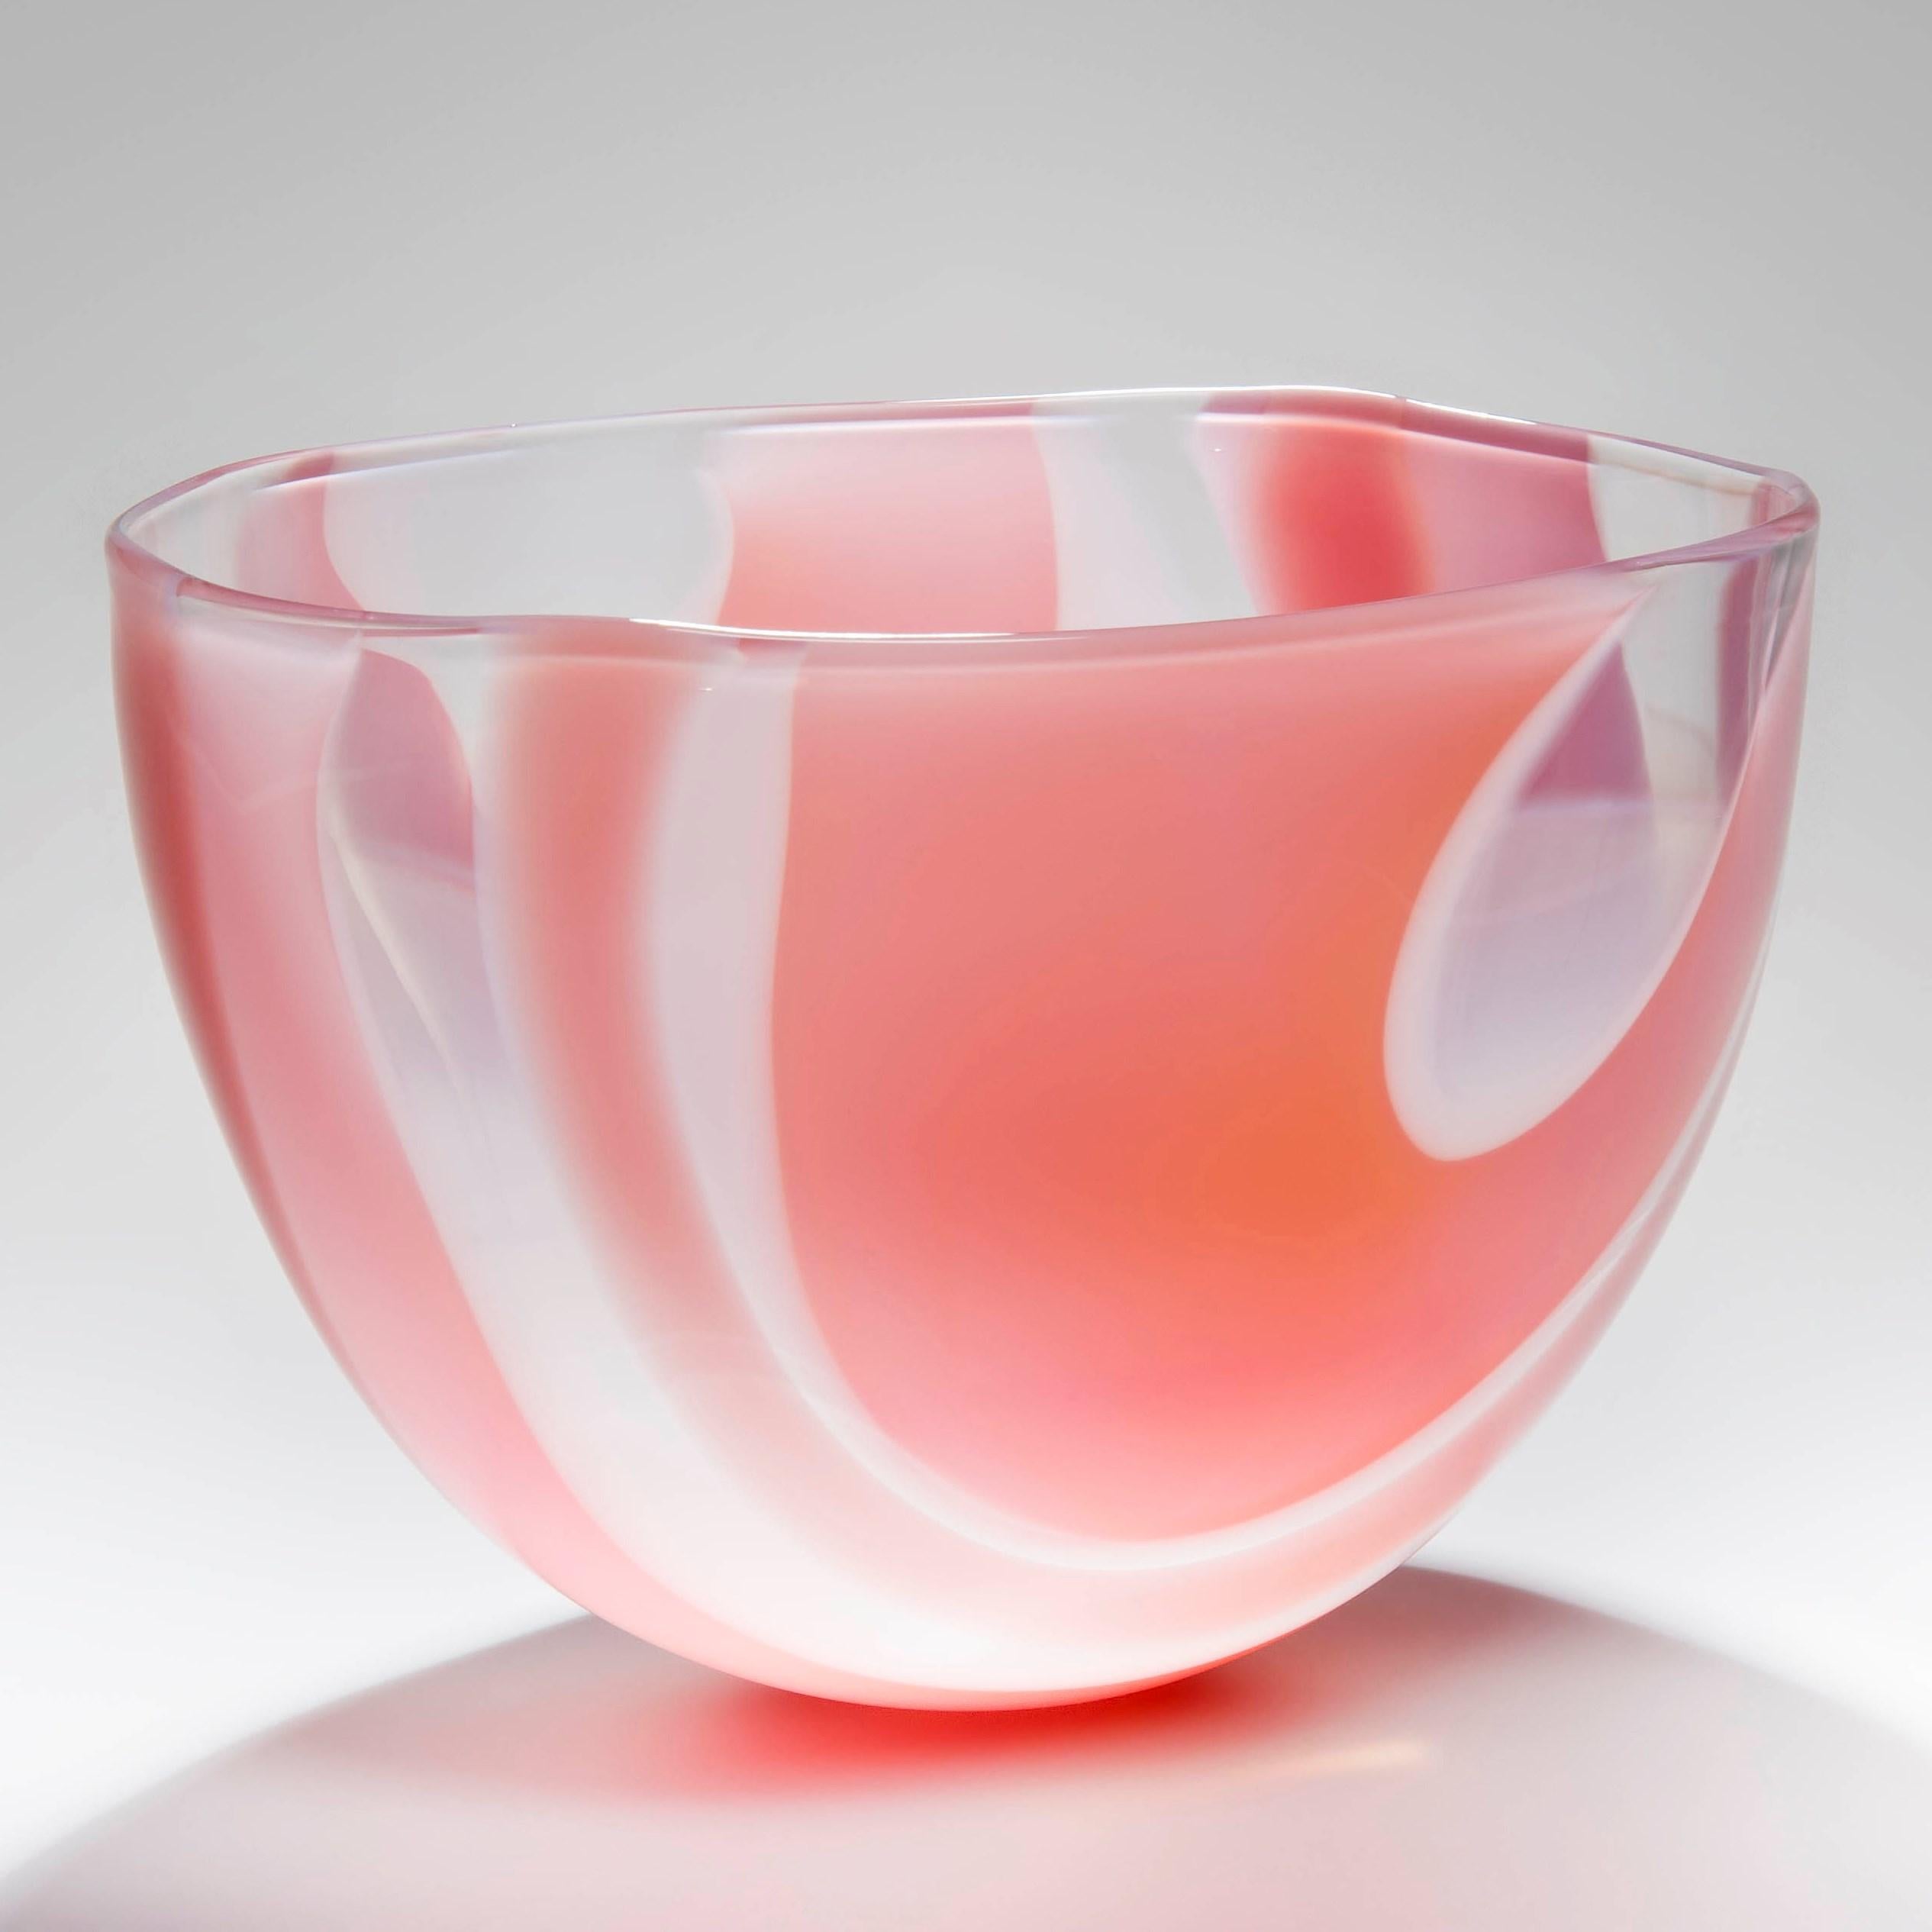 'Waves in Pink' is a beautifully crafted, handblown glass bowl by the British artist, Neil Wilkin.

'Waves' is a collection of beautifully crafted, unique glass bowls and centrepieces by the British artist Neil Wilkin. Taking a painterly approach,